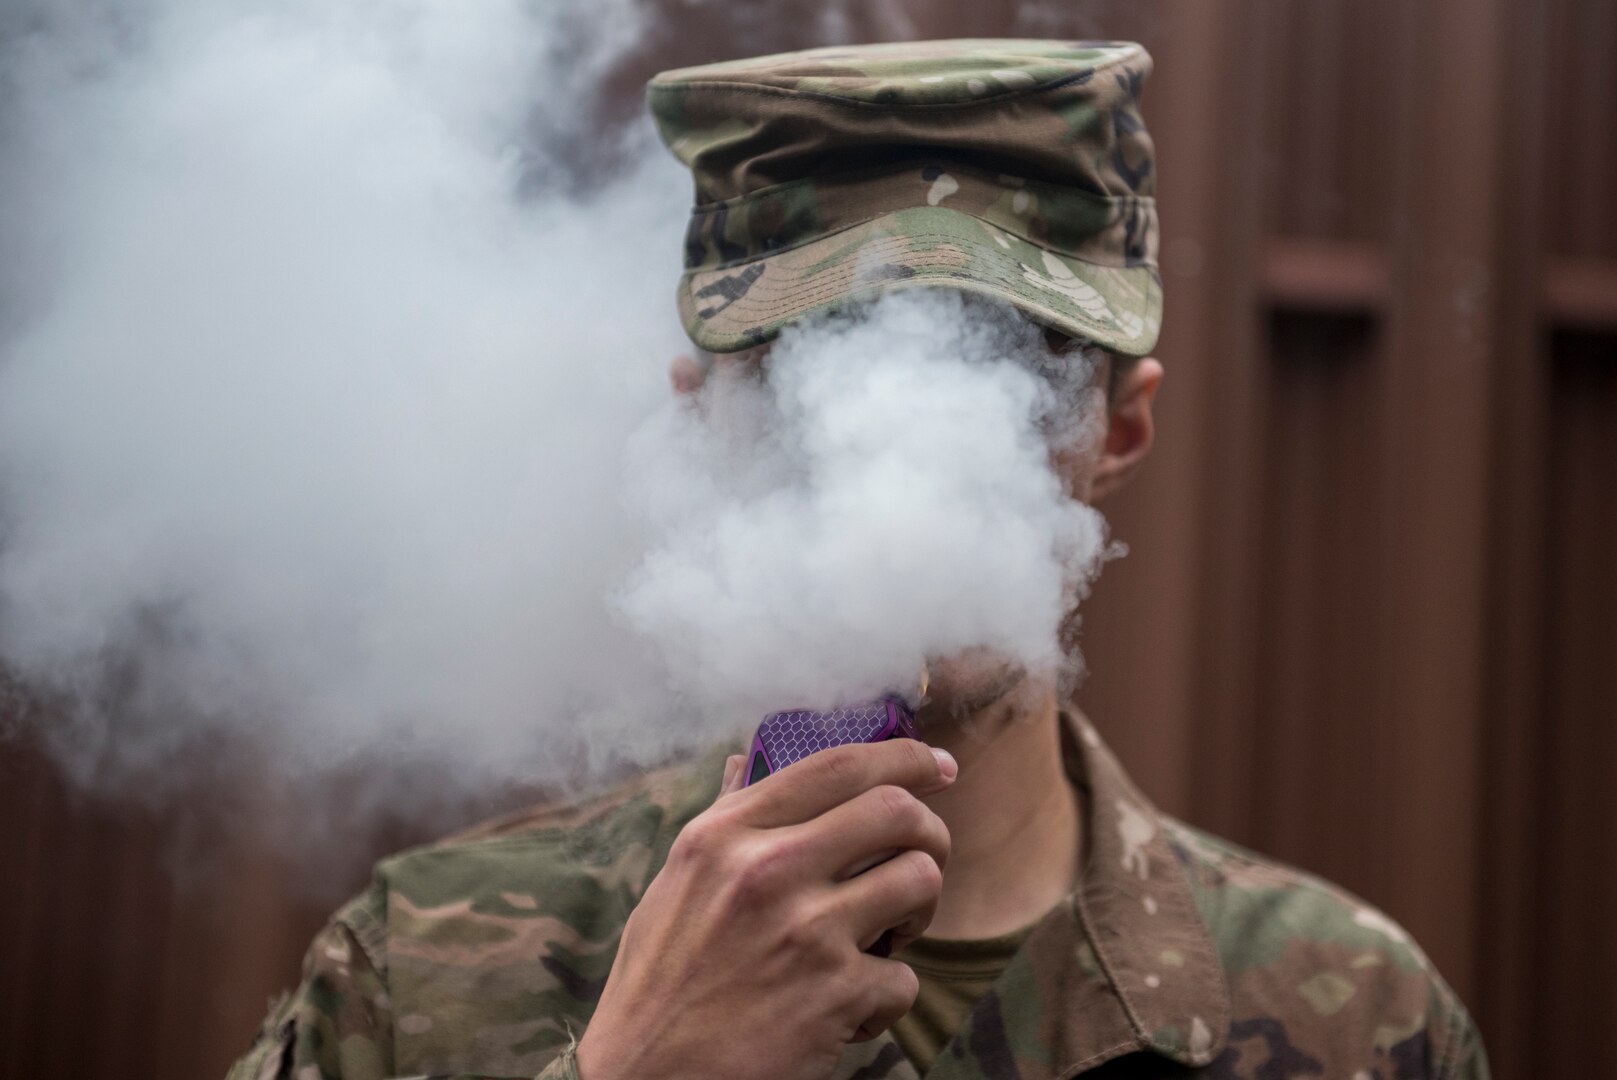 An Airman vapes in an authorized smoking area during a break. As of Oct. 29, 2019, more than 1,800 lung injury cases and 37 deaths have been reported to the Centers for Disease Control and Prevention with the only commonality among all cases being the patient’s use of e-cigarettes or vaping products.